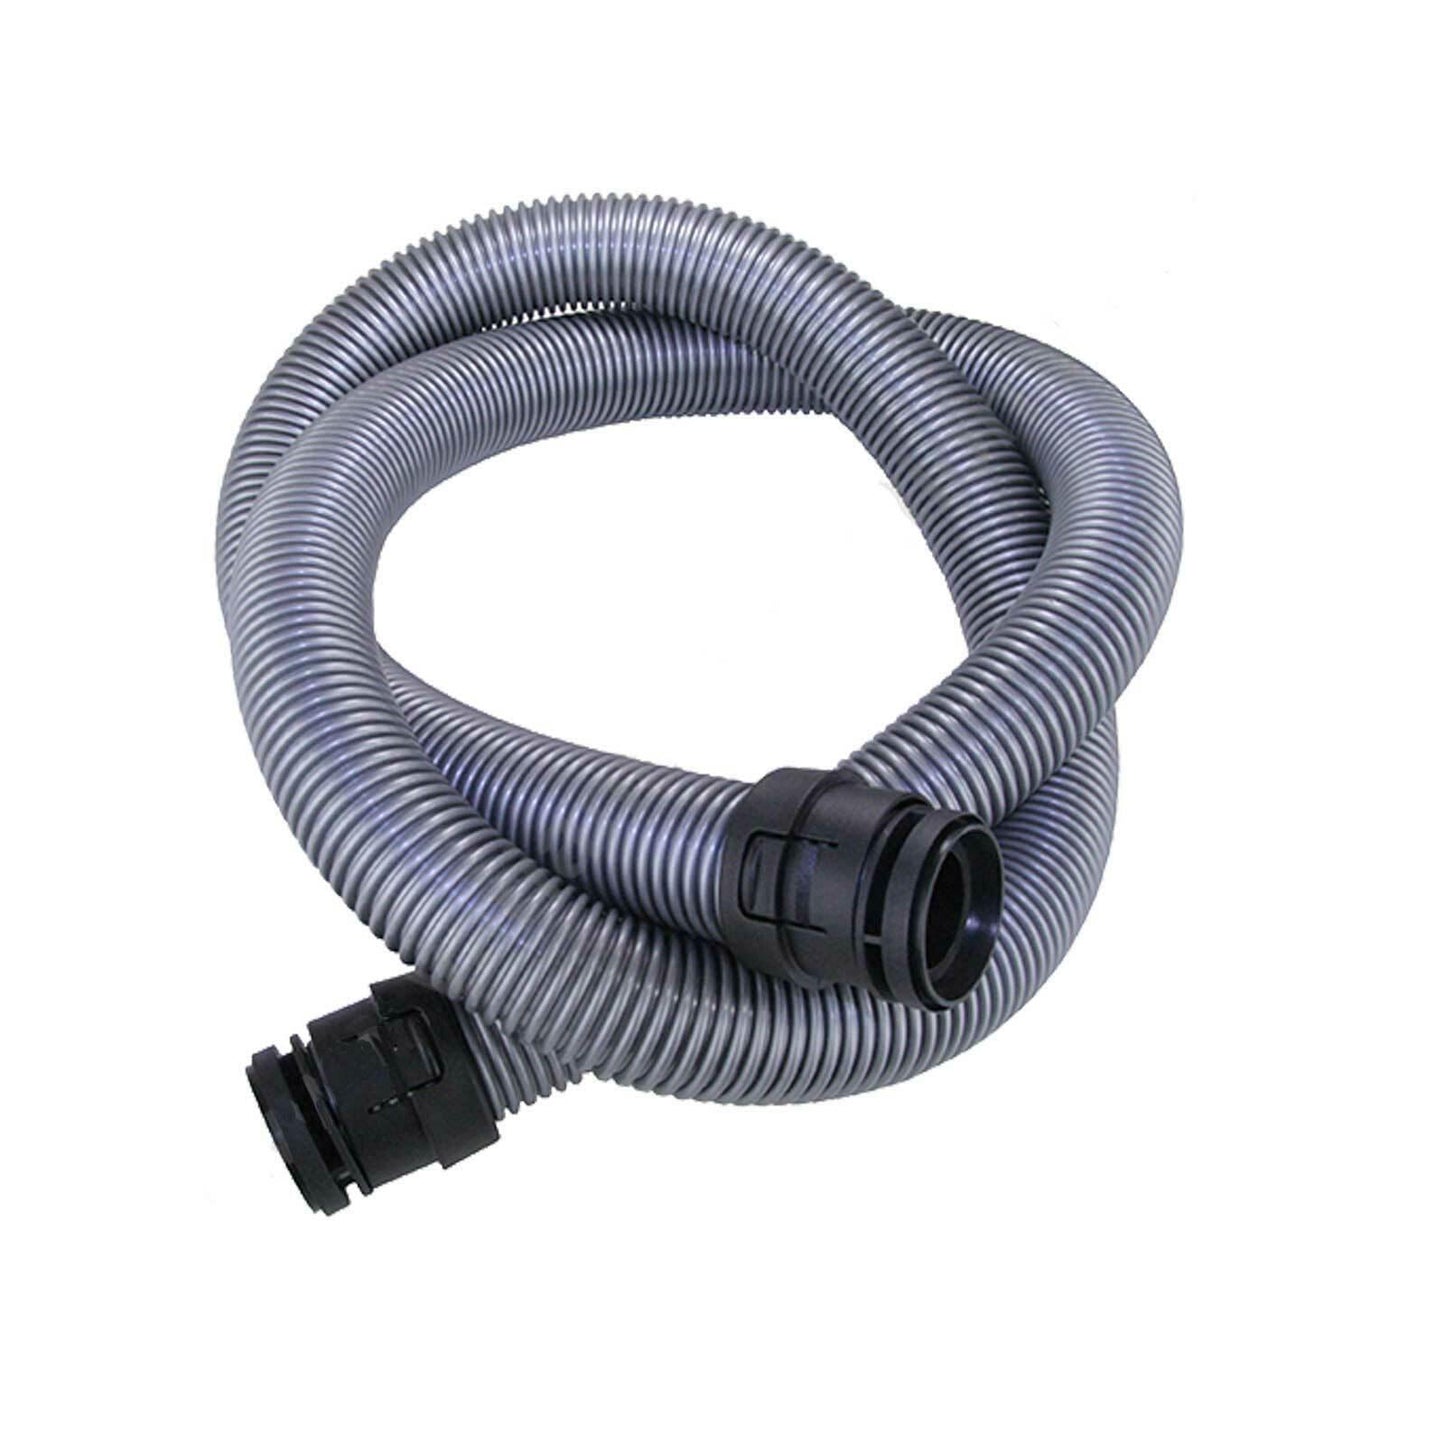 Vacuum Cleaner Suction Hose 1.8M For Miele Classic C1 S2 S2000 Series 07736191 Sparesbarn